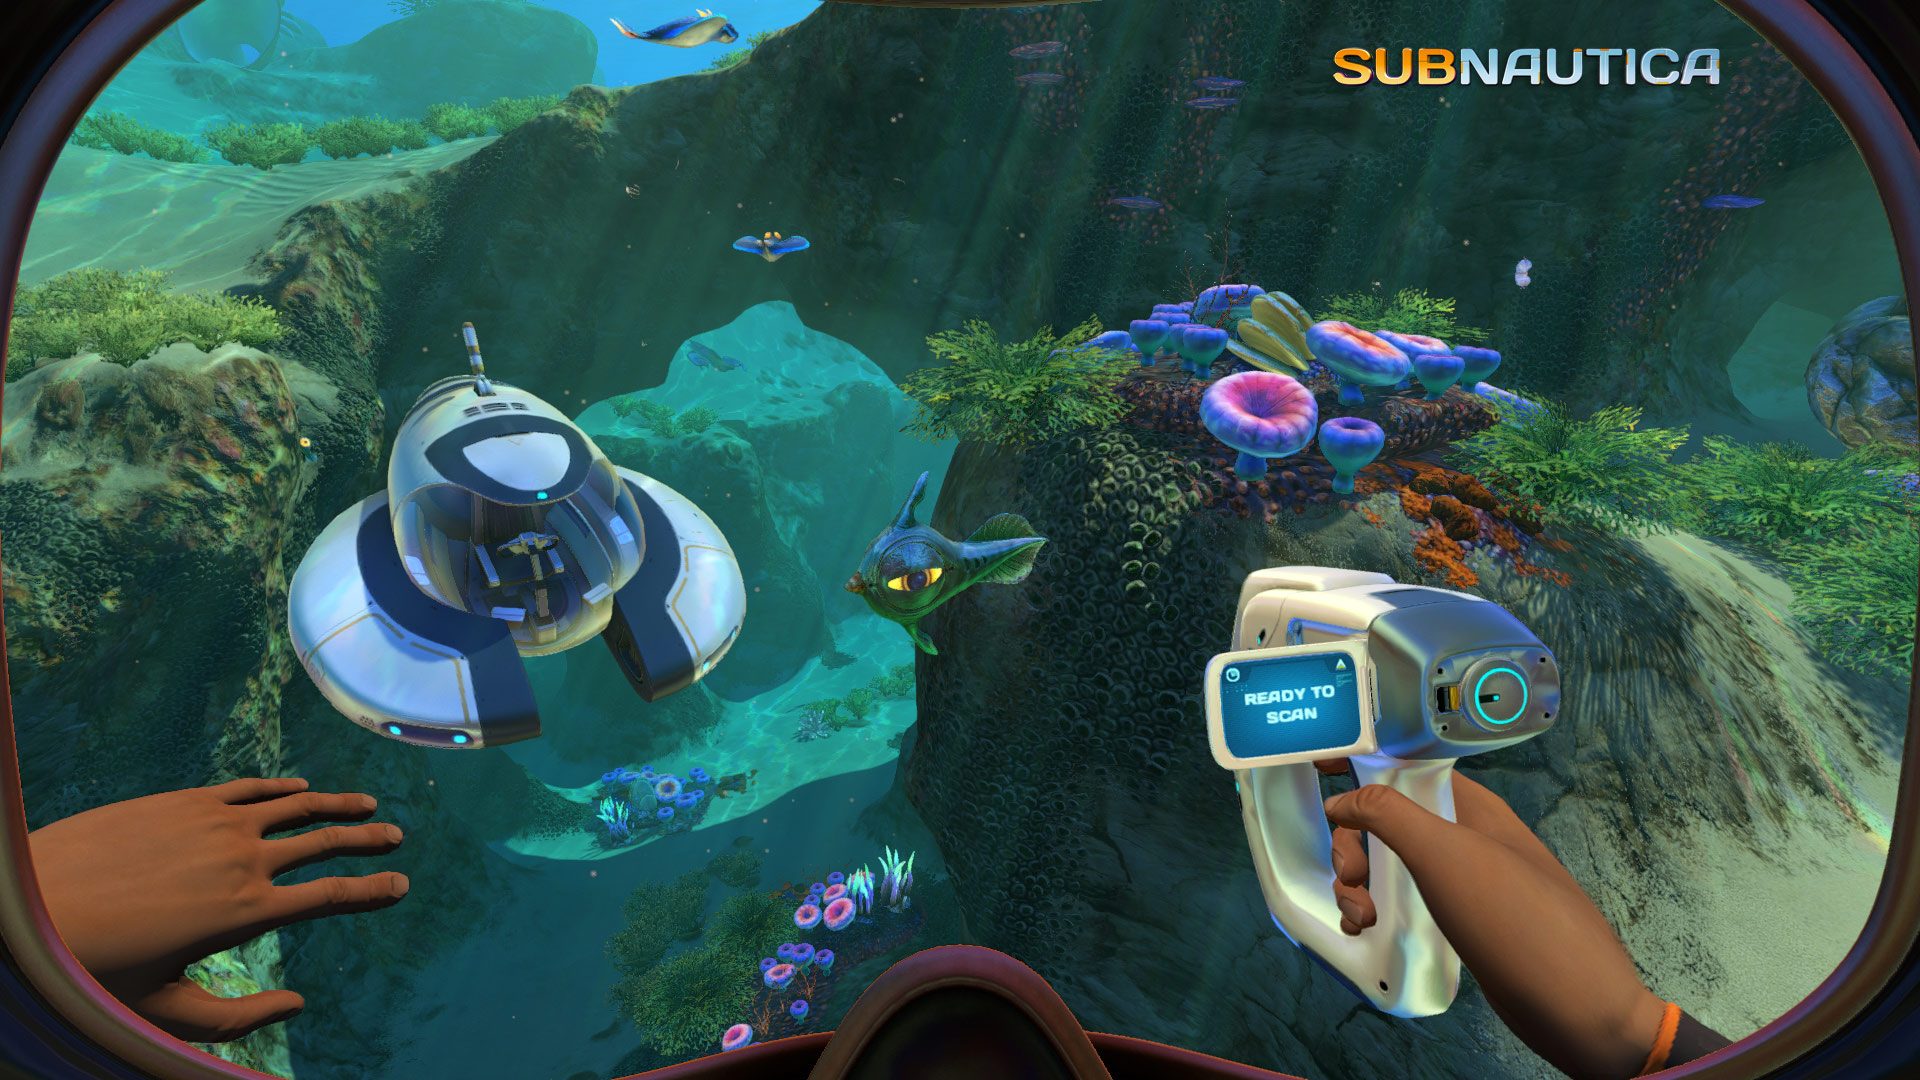 'Subnautica' to Hit PS4 Holiday Season, PSVR Support Not Included